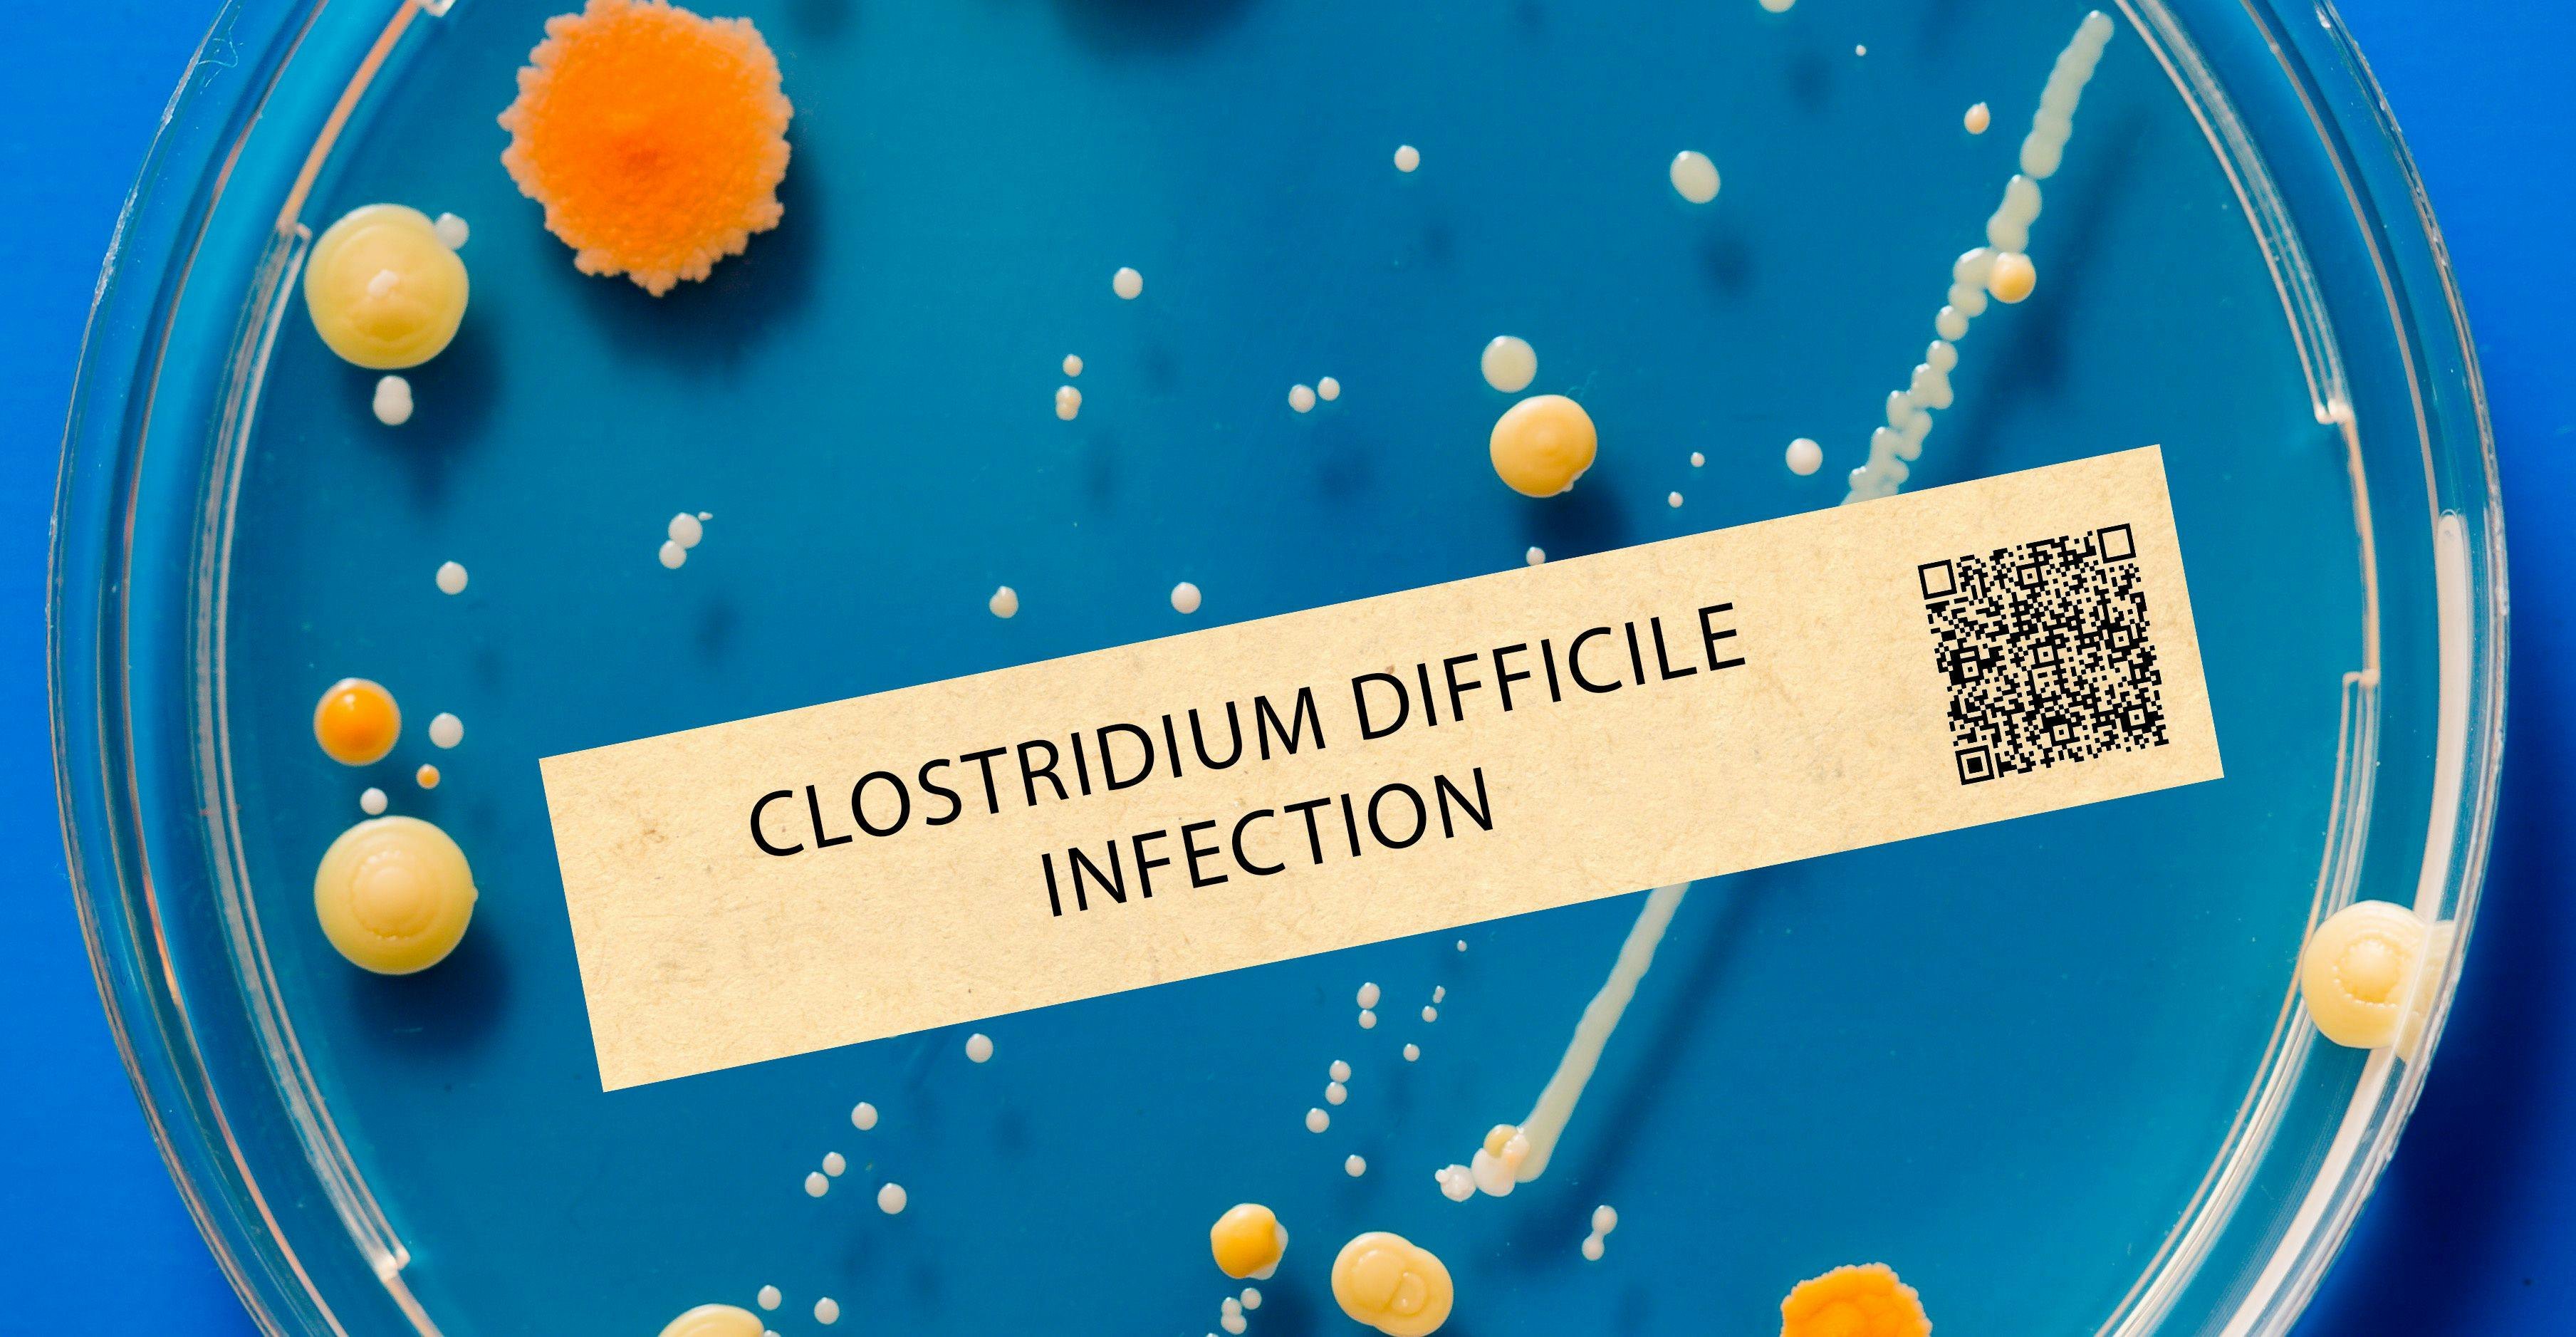 "For example, many clinicians consider C diff to be a hospital acquired infection that primarily affects the elderly." Image Credit: © luchschenF - stock.adobe.com